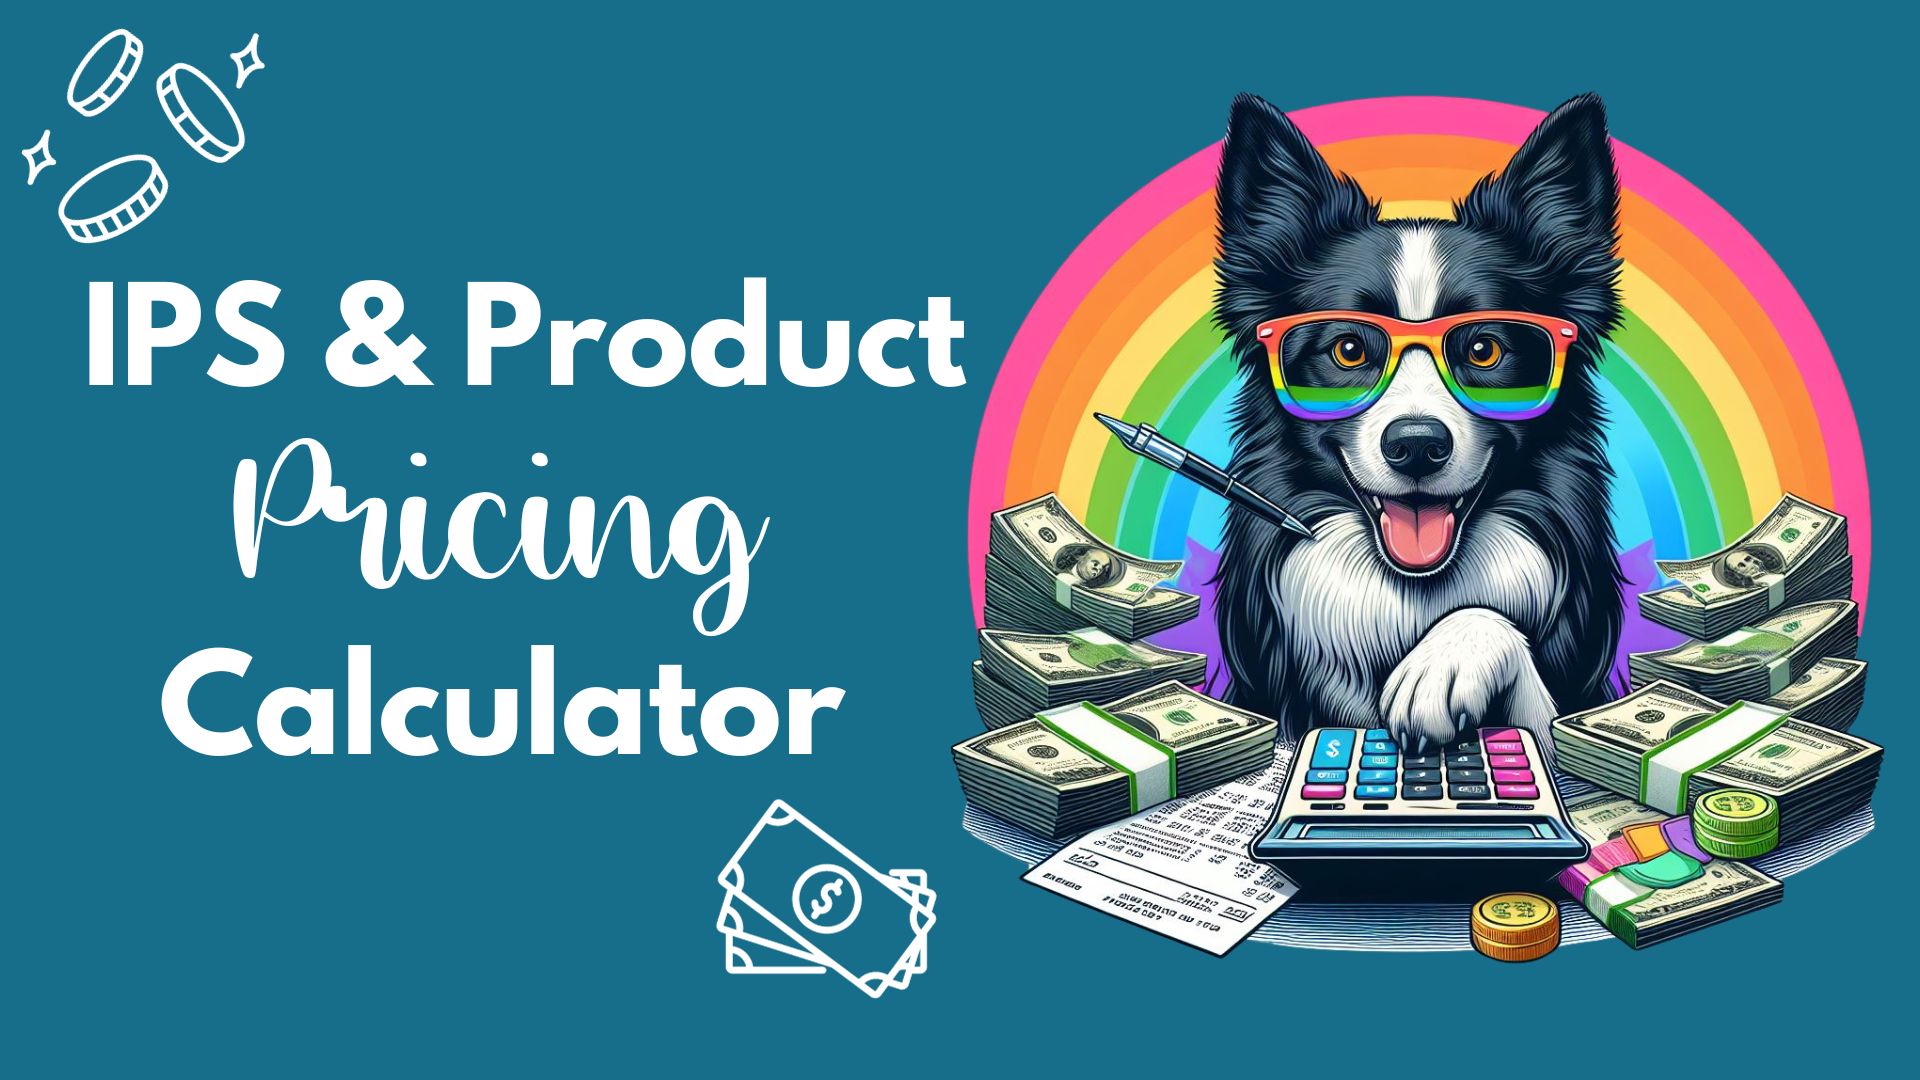 IPS & Product Pricing Calculator